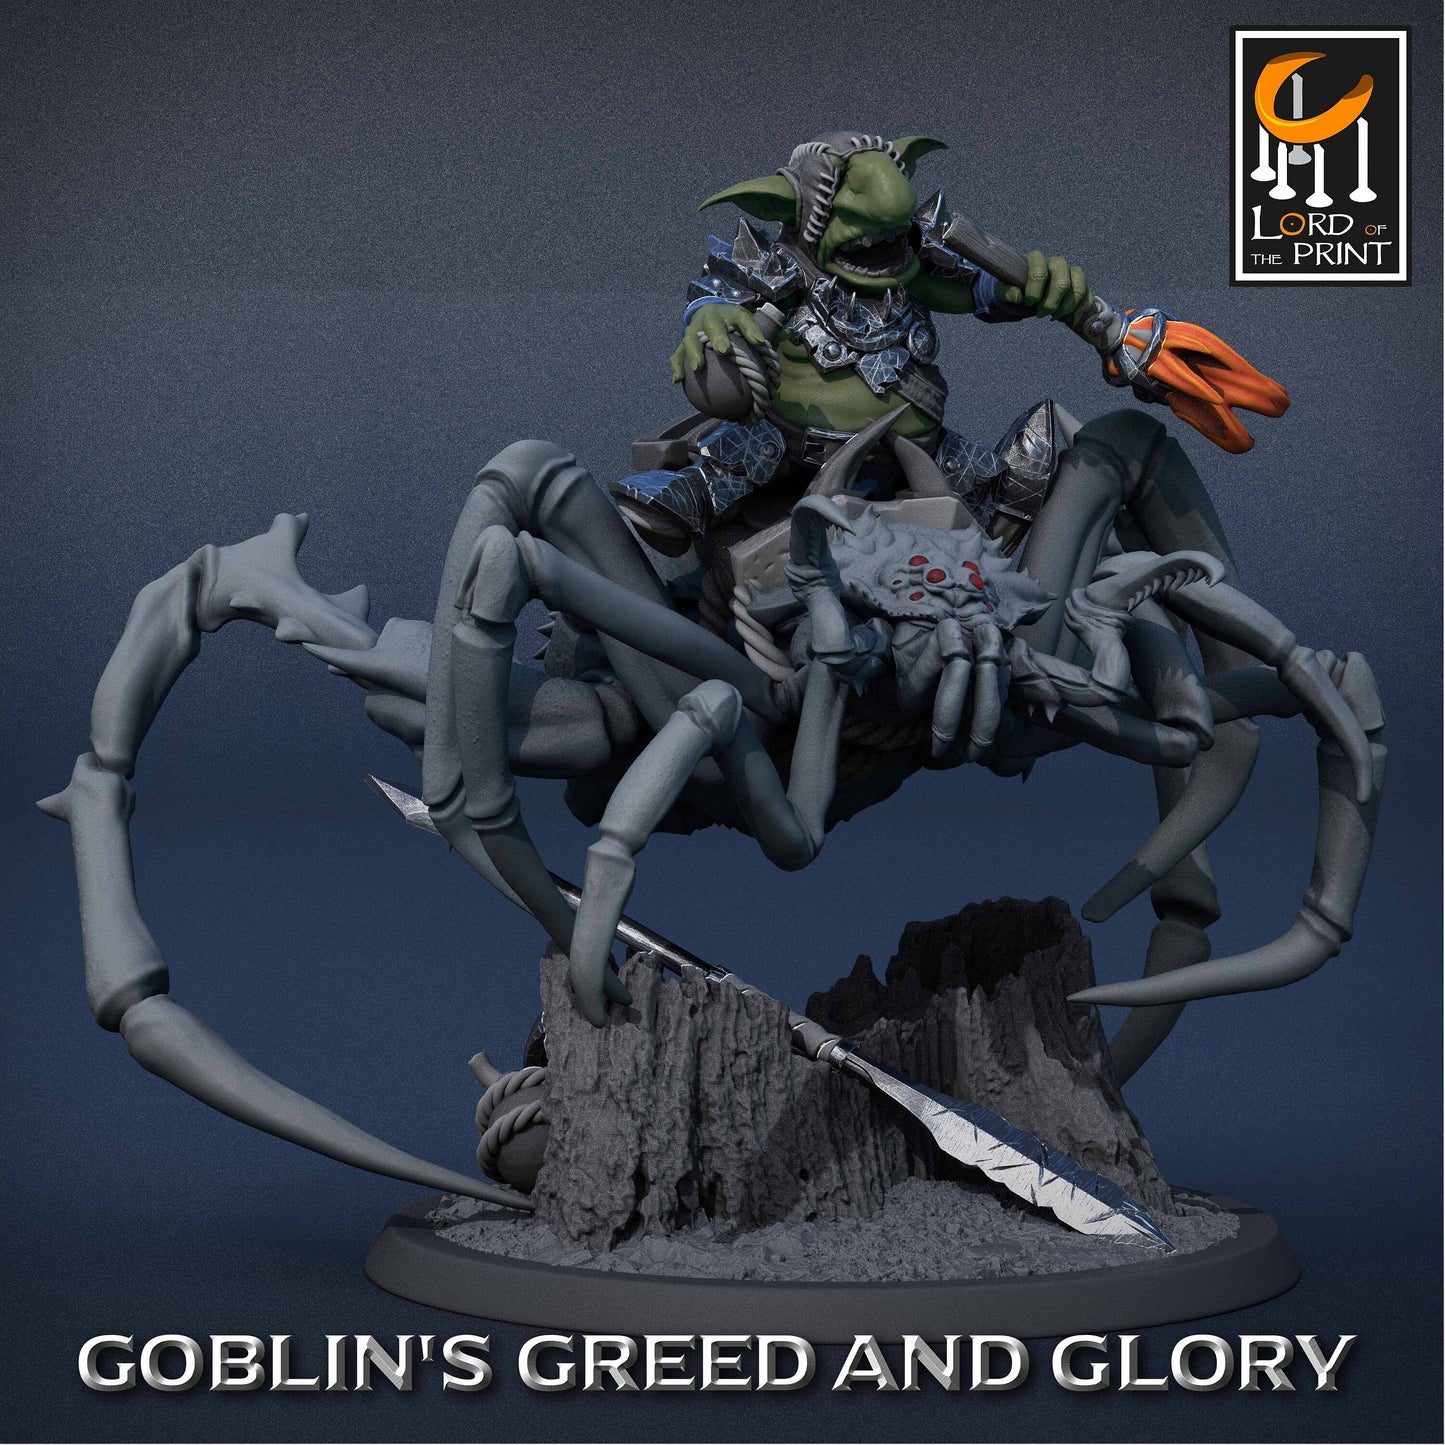 Goblin Spider Mounts (Set 2) by Lord of the Print | Please Read Description